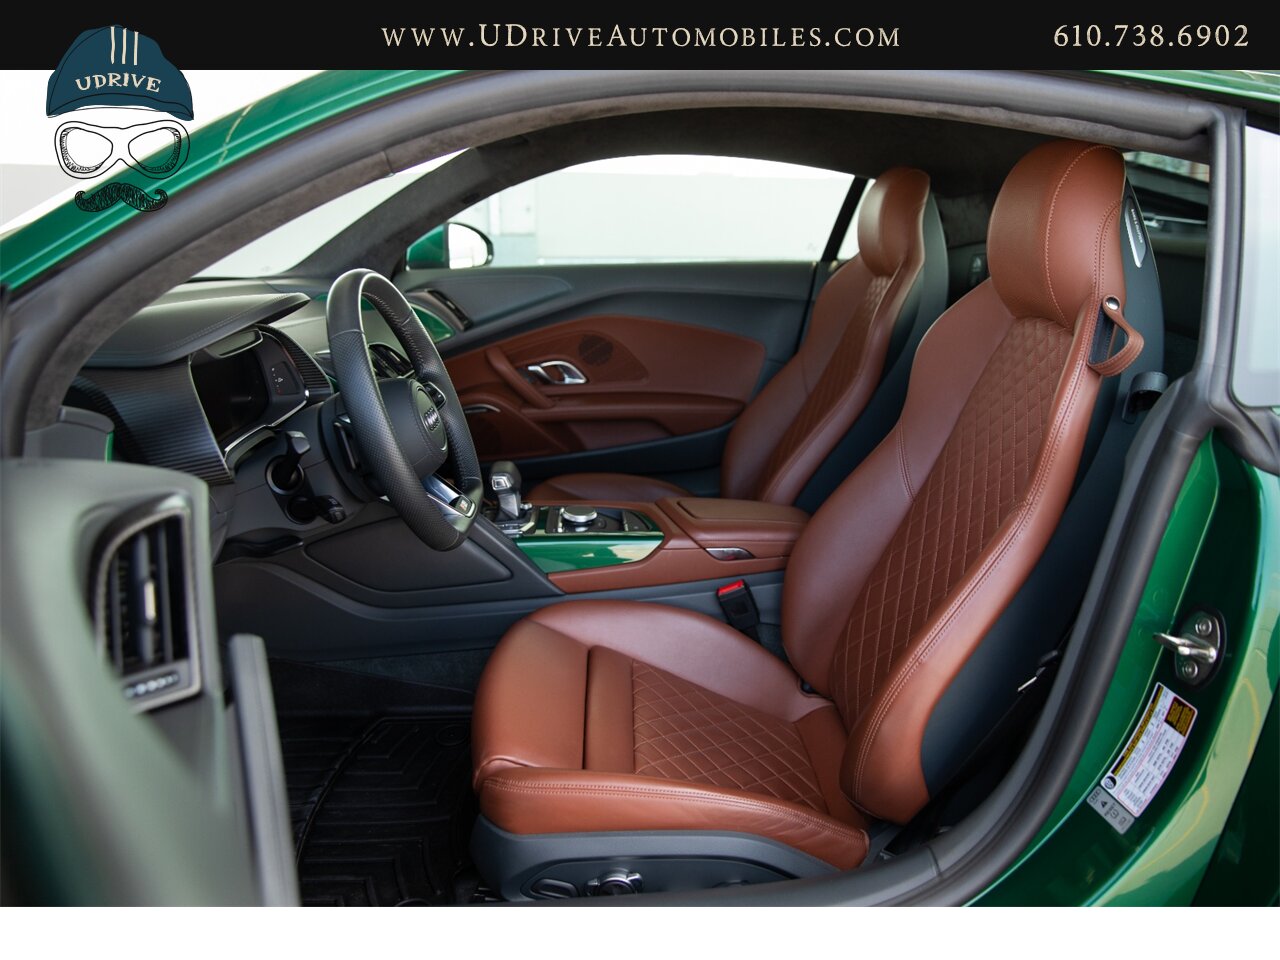 2017 Audi R8 Audi Exclusive Avocado Green Vermont Brown Leather  Diamond Stitching V10 Carbon Fiber - Photo 34 - West Chester, PA 19382